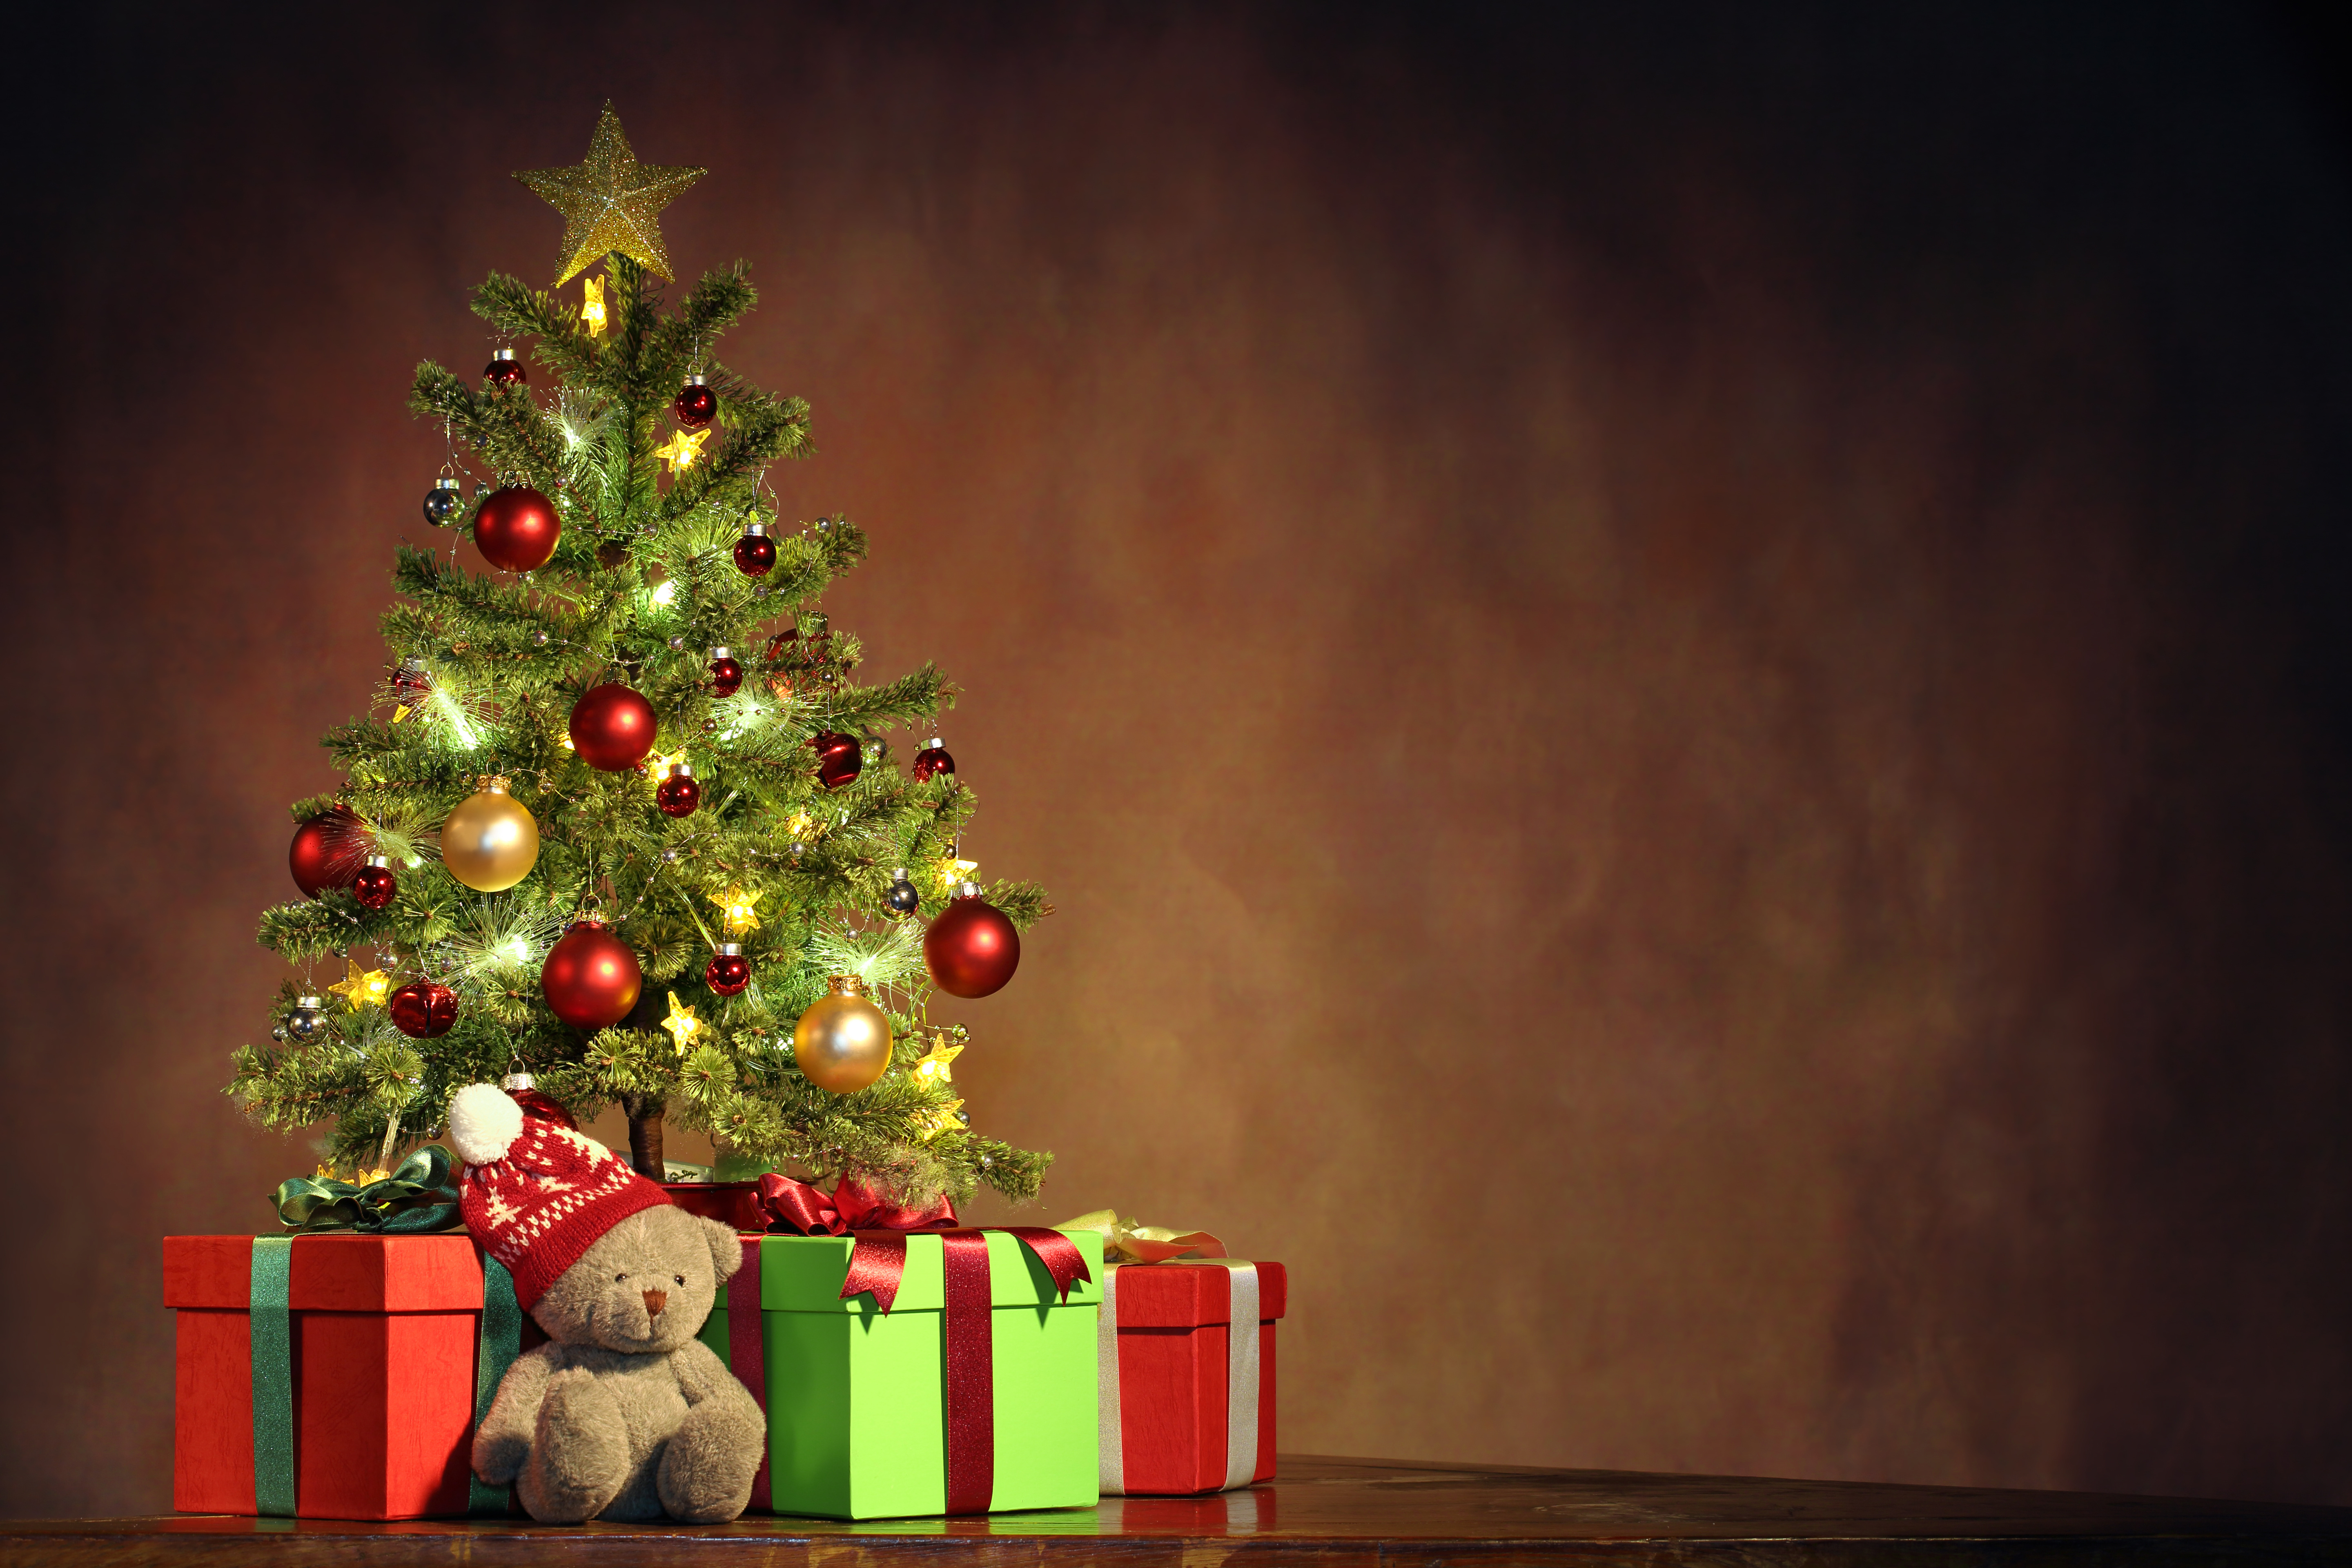 Image: Christmas, new year, gifts, Teddy bear, toy, tree, star, decoration, balloons, fancy